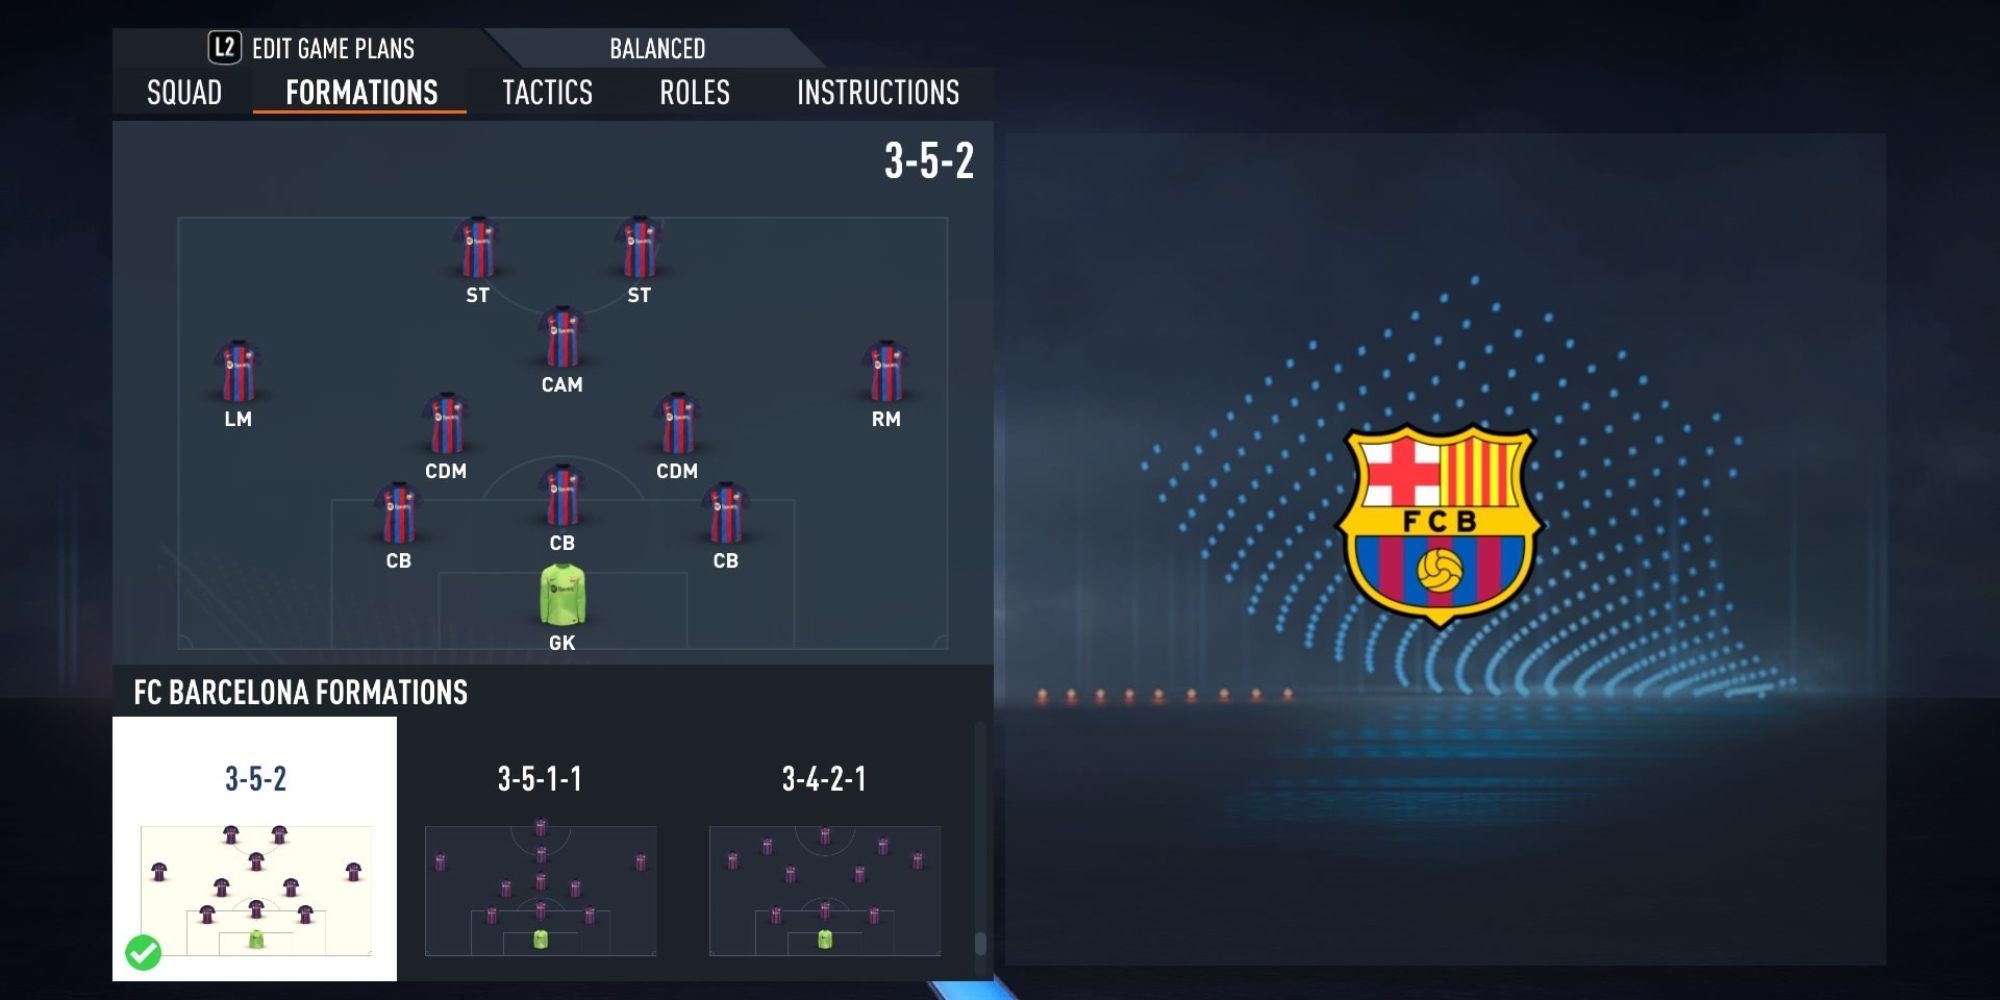 Barcelona on FIFA 23 using a 352 formation